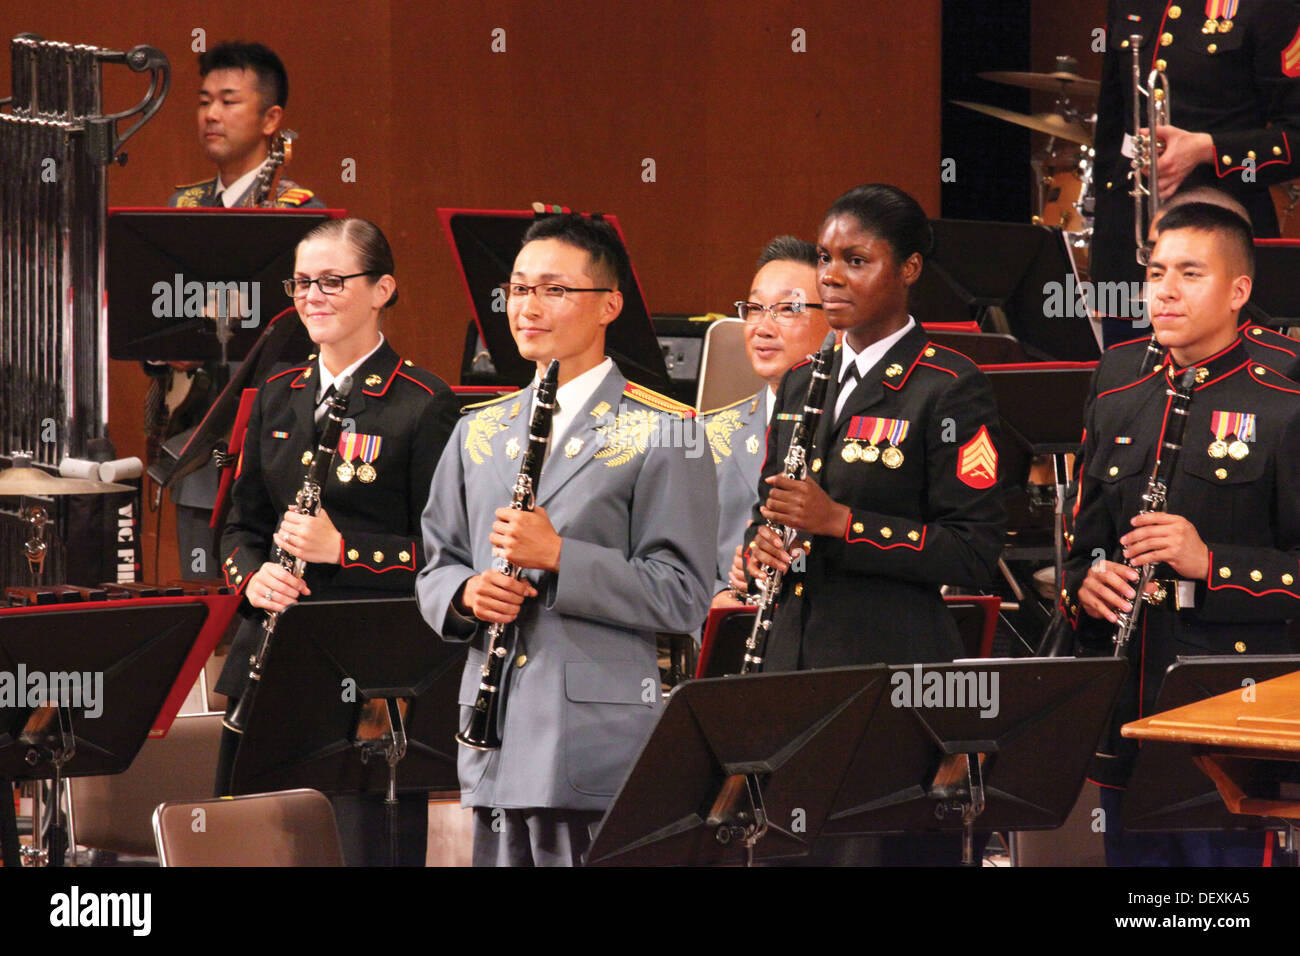 Musicians with the Japan Ground Self-Defense Force 15th Band and the III Marine Expeditionary Force Band stand during applause from a full-capacity crowd Sept. 14 at the Okinawa Civic Hall in Okinawa City during the 18th Annual Combined Band Concert. The Stock Photo